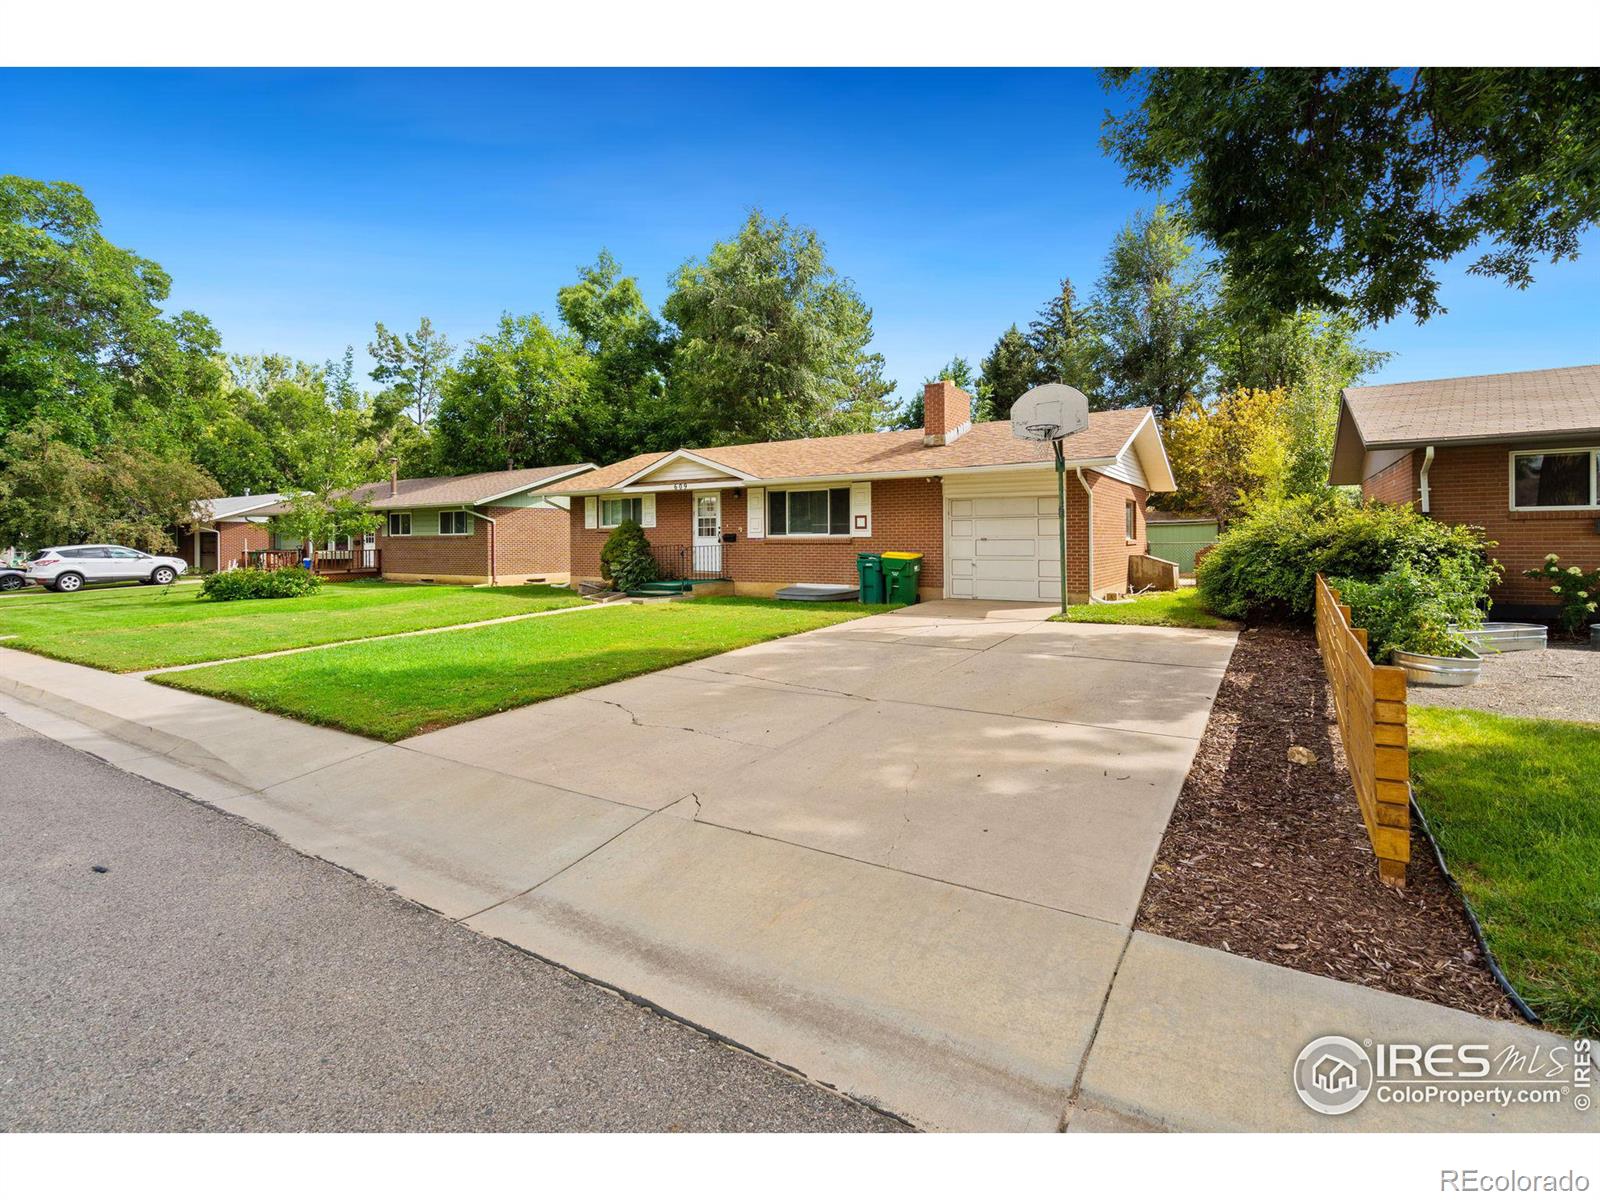 609  Tulane Drive, fort collins MLS: 123456789995874 Beds: 4 Baths: 2 Price: $485,000